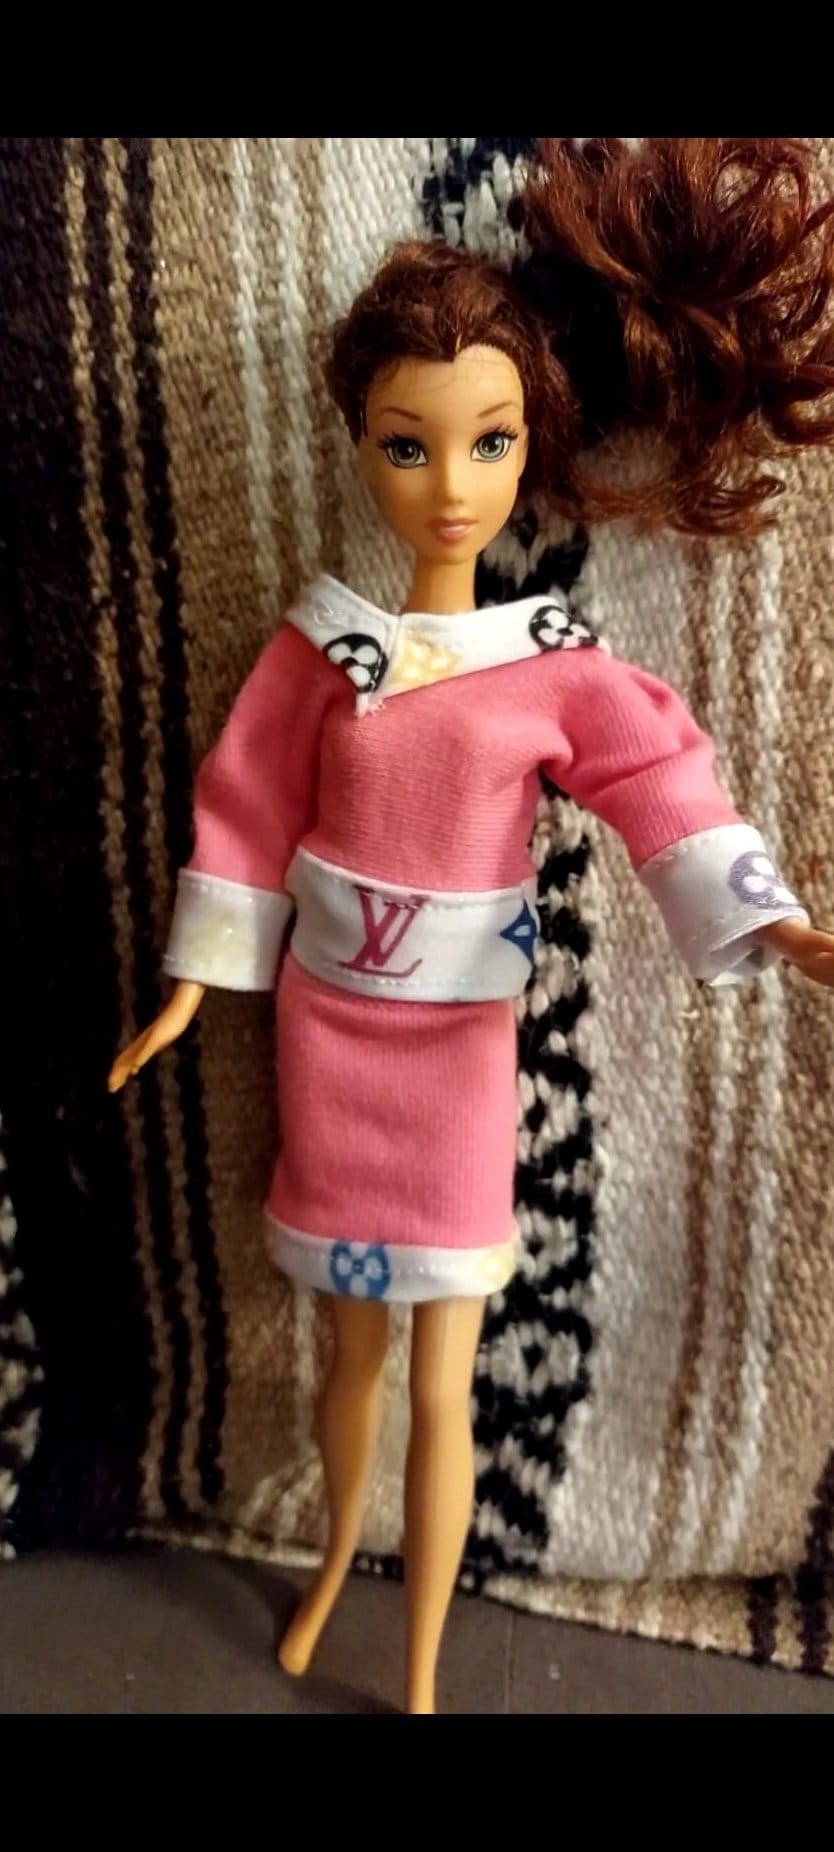 Louis Vuitton Doll - 5 For Sale on 1stDibs  louis vuitton doll price, louis  vuitton dolls, lvdoll